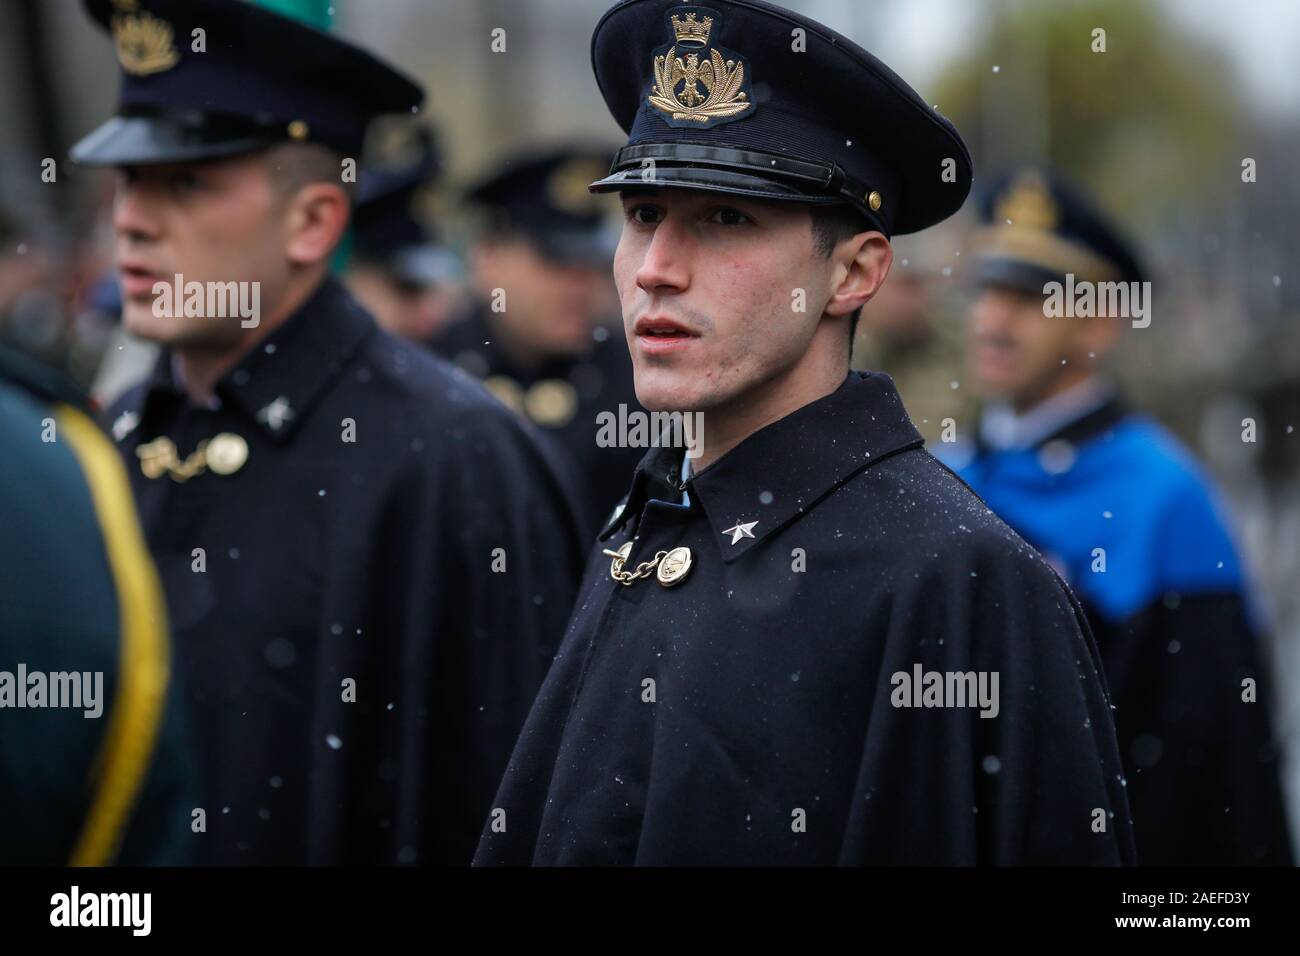 Bucharest, Romania - December 01, 2019: Italian soldiers in ceremonial uniforms take part at the Romanian National Day military parade during a snowy Stock Photo